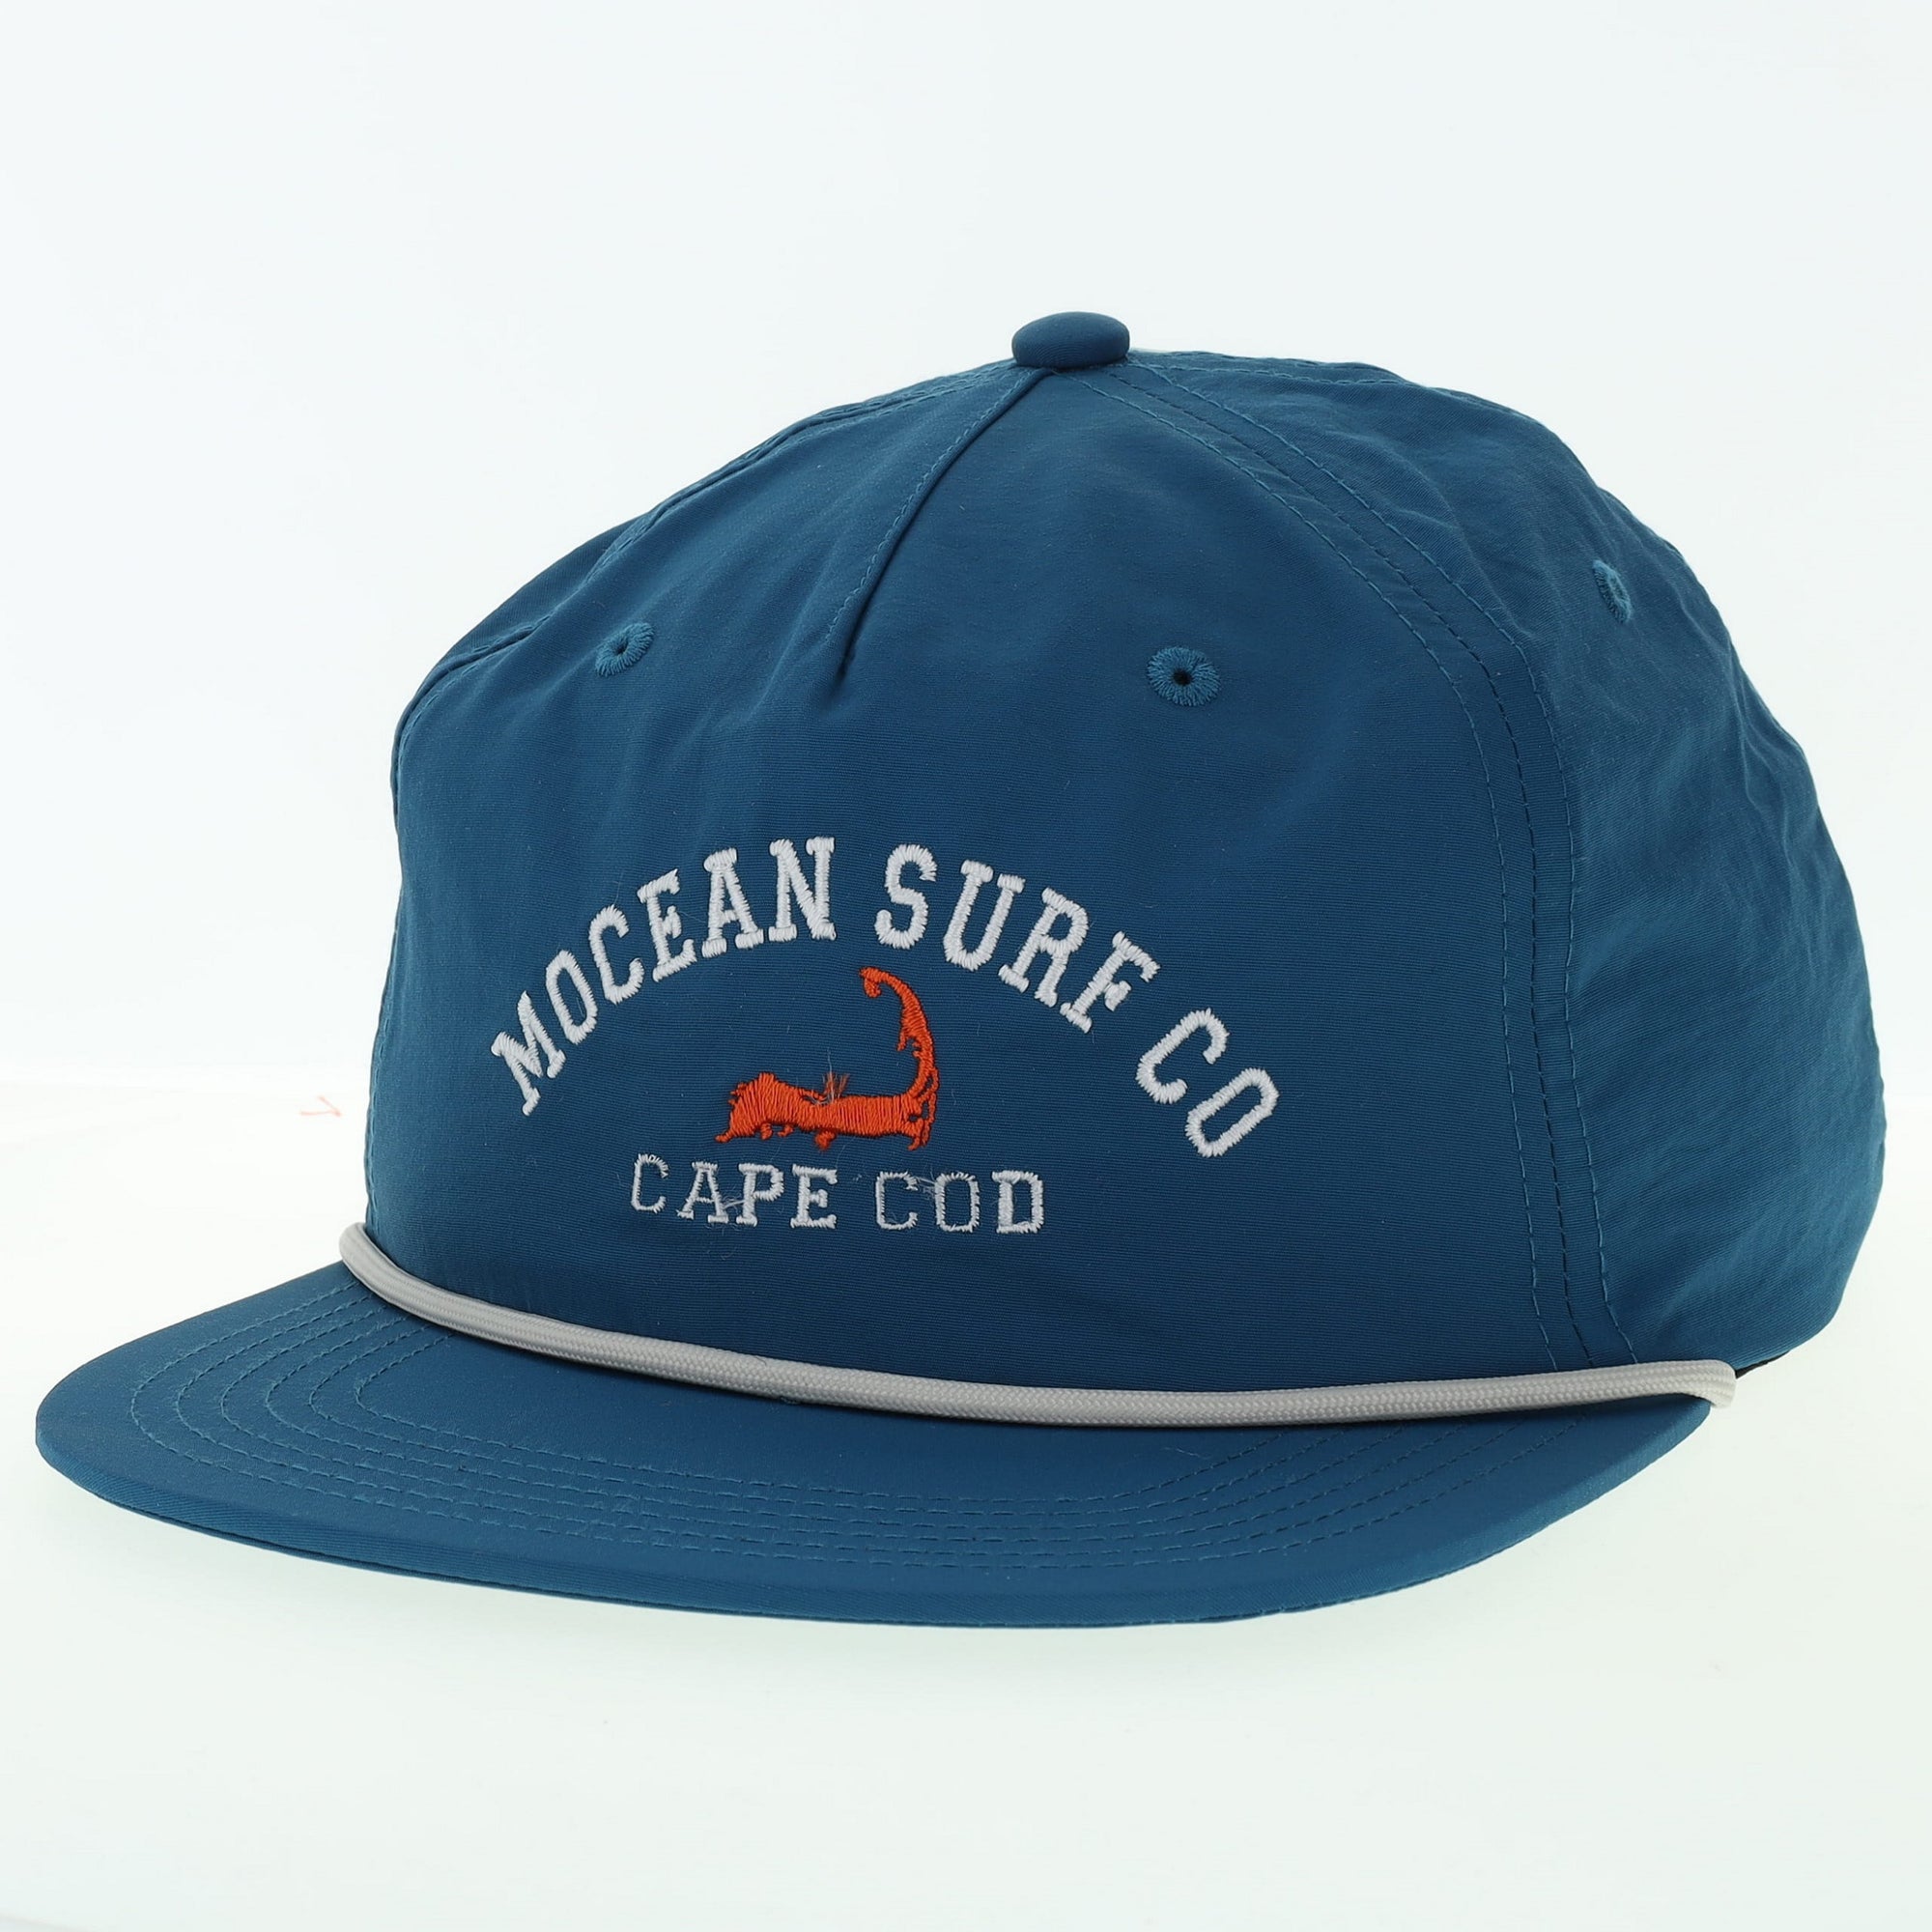 MOCEAN Surf Co. Chill Hat